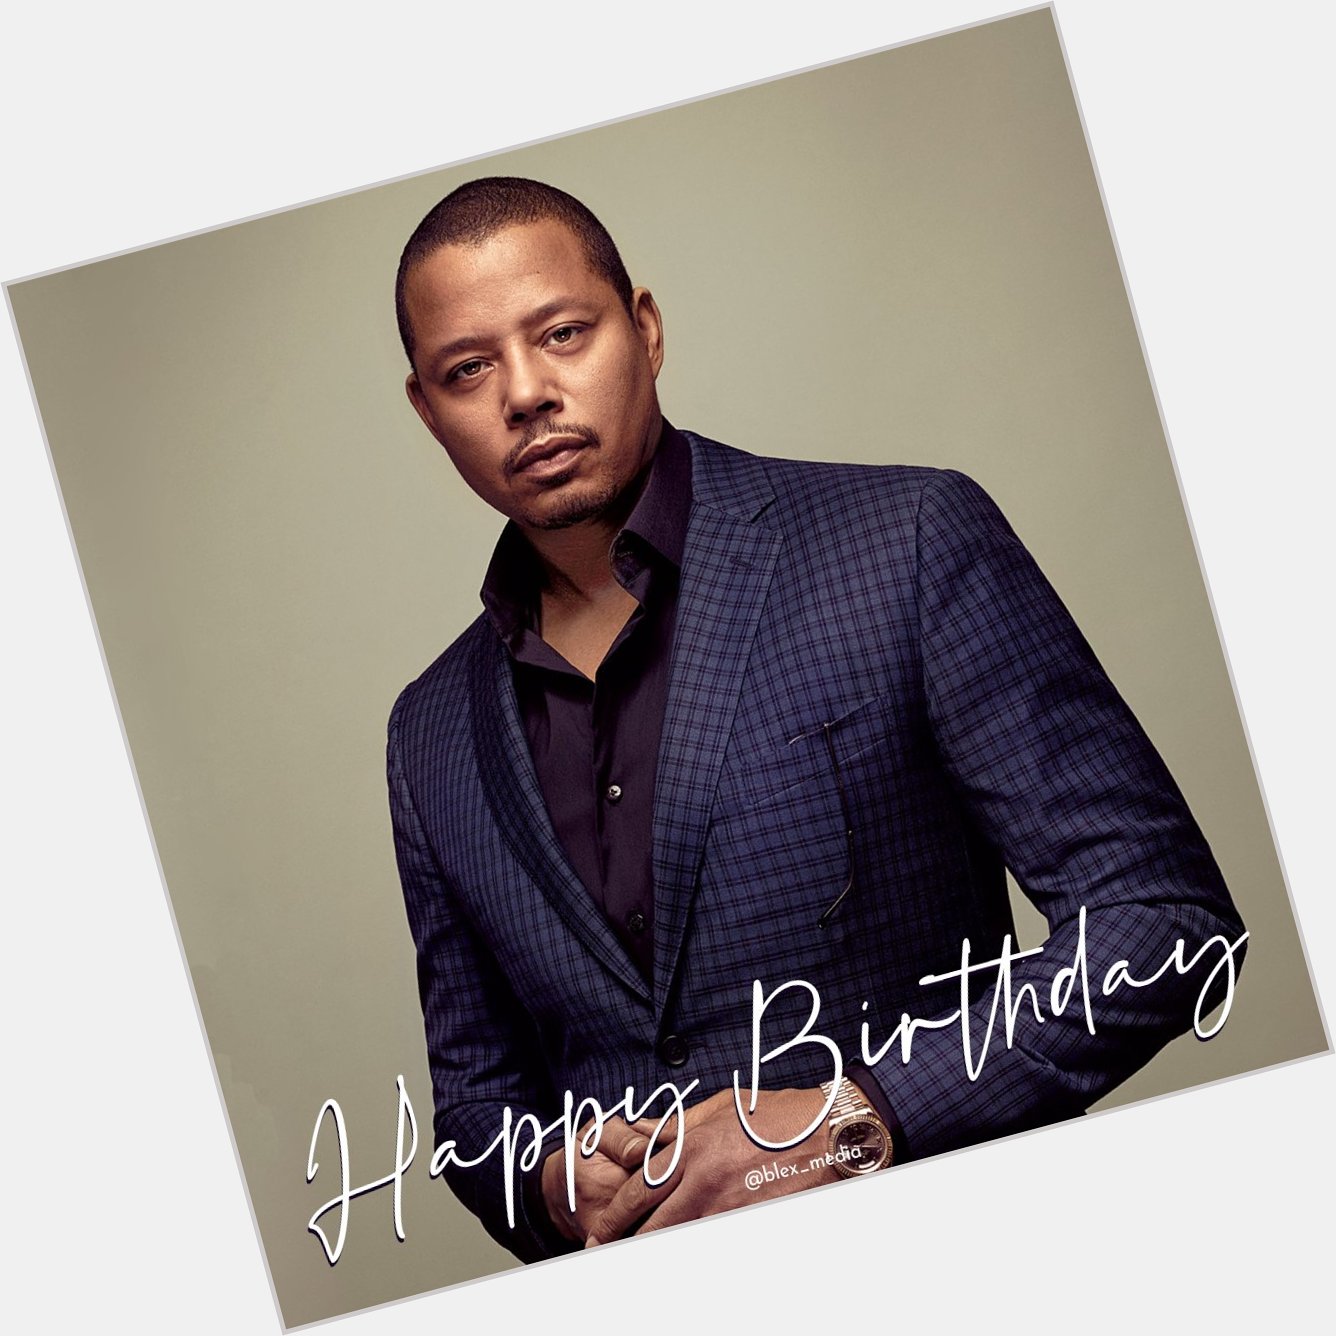 Happy Birthday, Terrence Howard! He\s had quite the career, what\s your favorite role of his? 